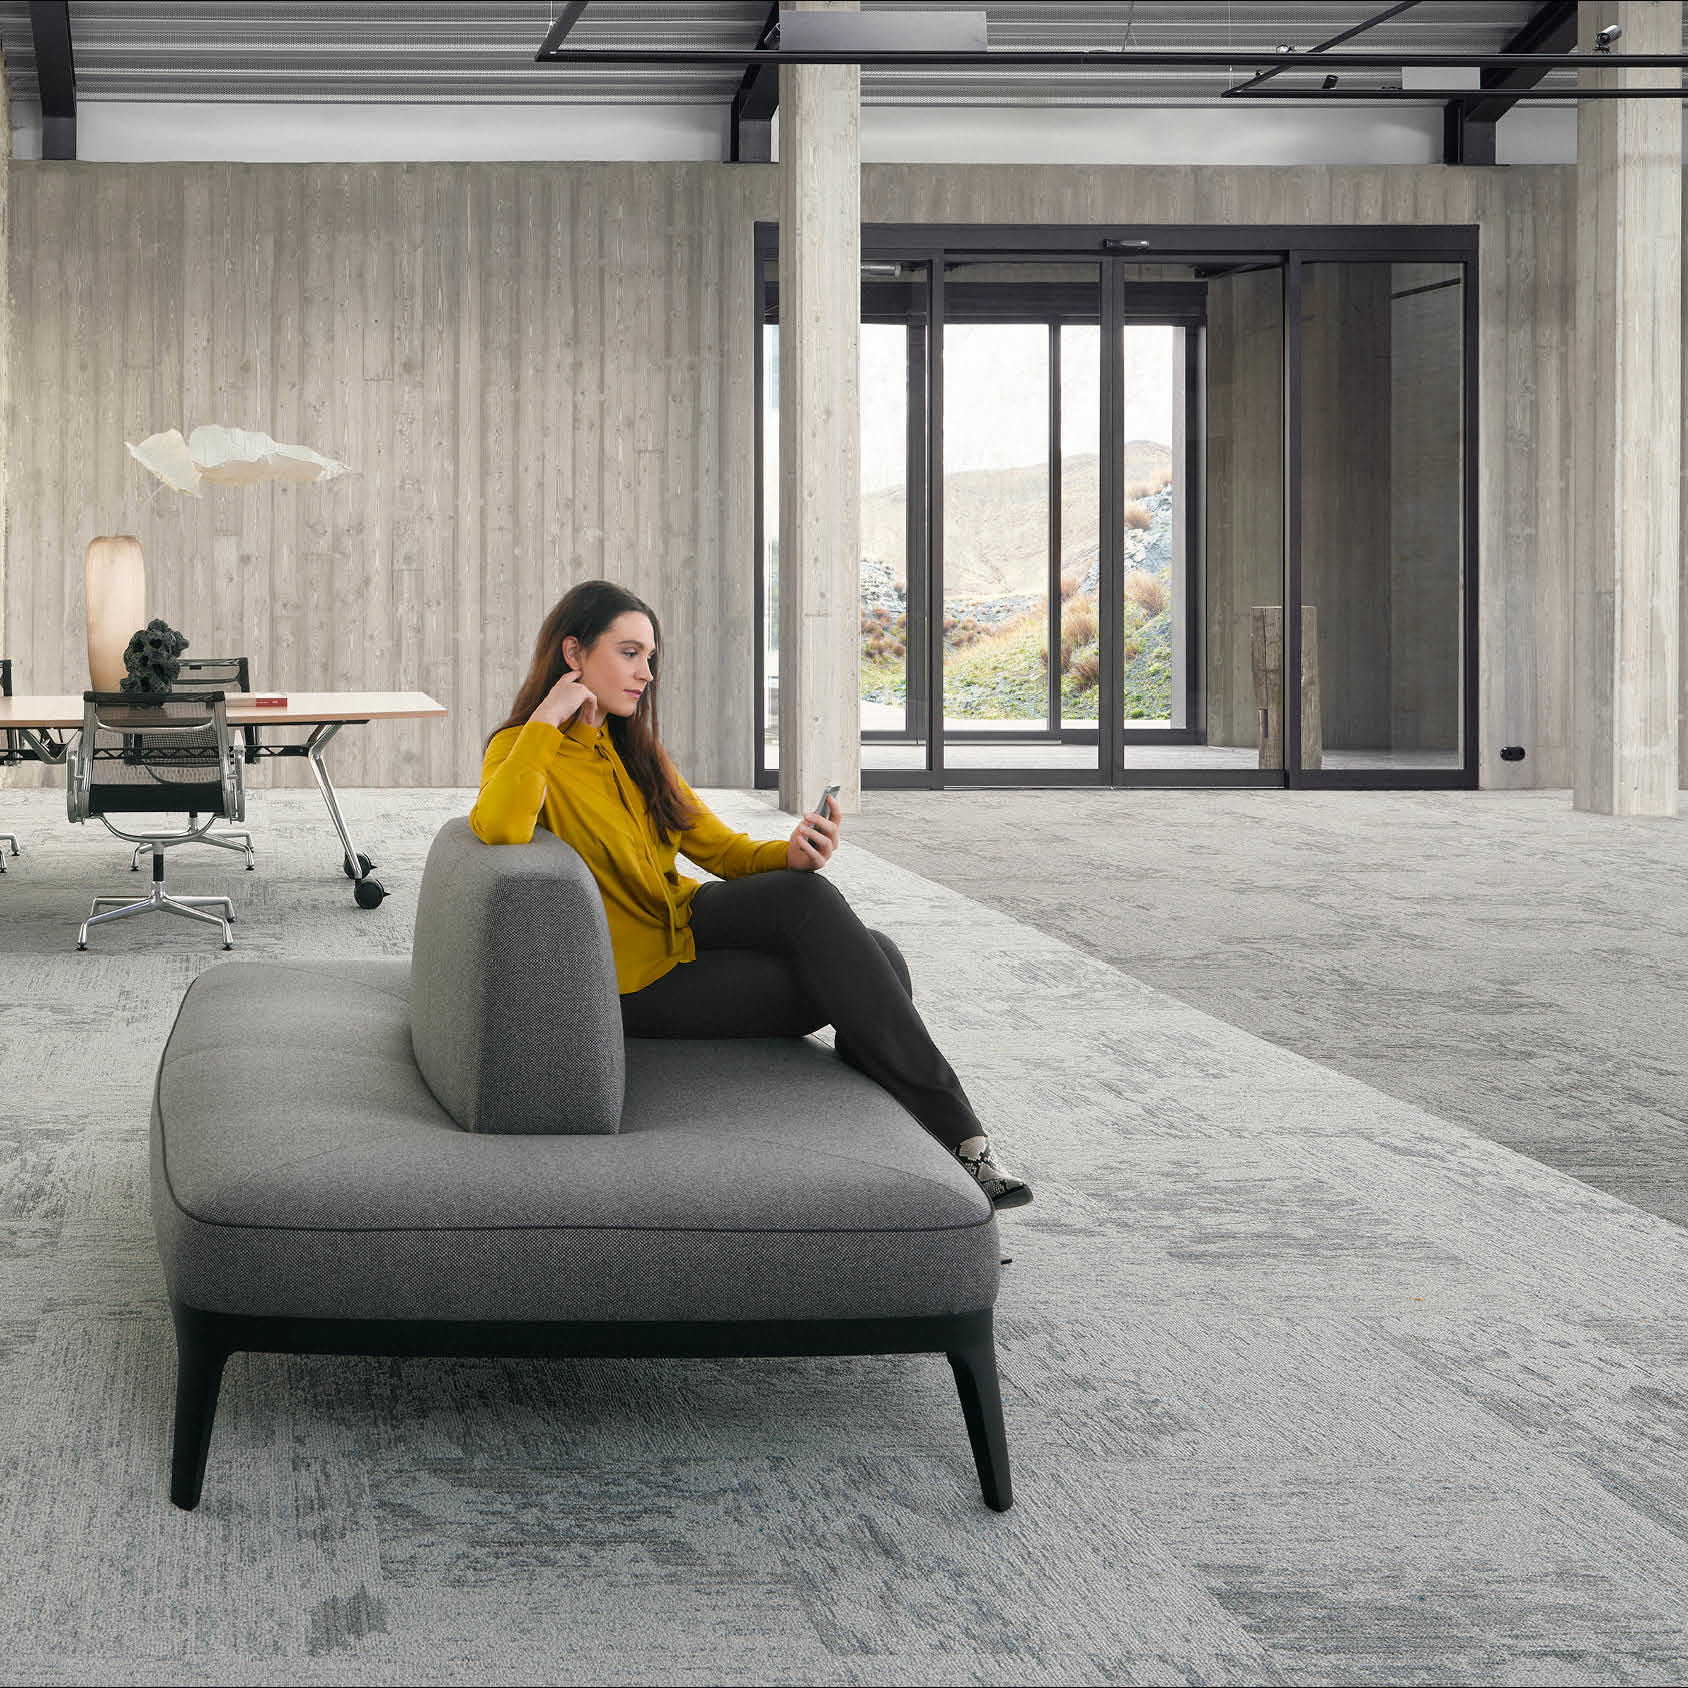 Desso Breccia Carpet Tile in a large commercial open space with sofa and woman on her phone